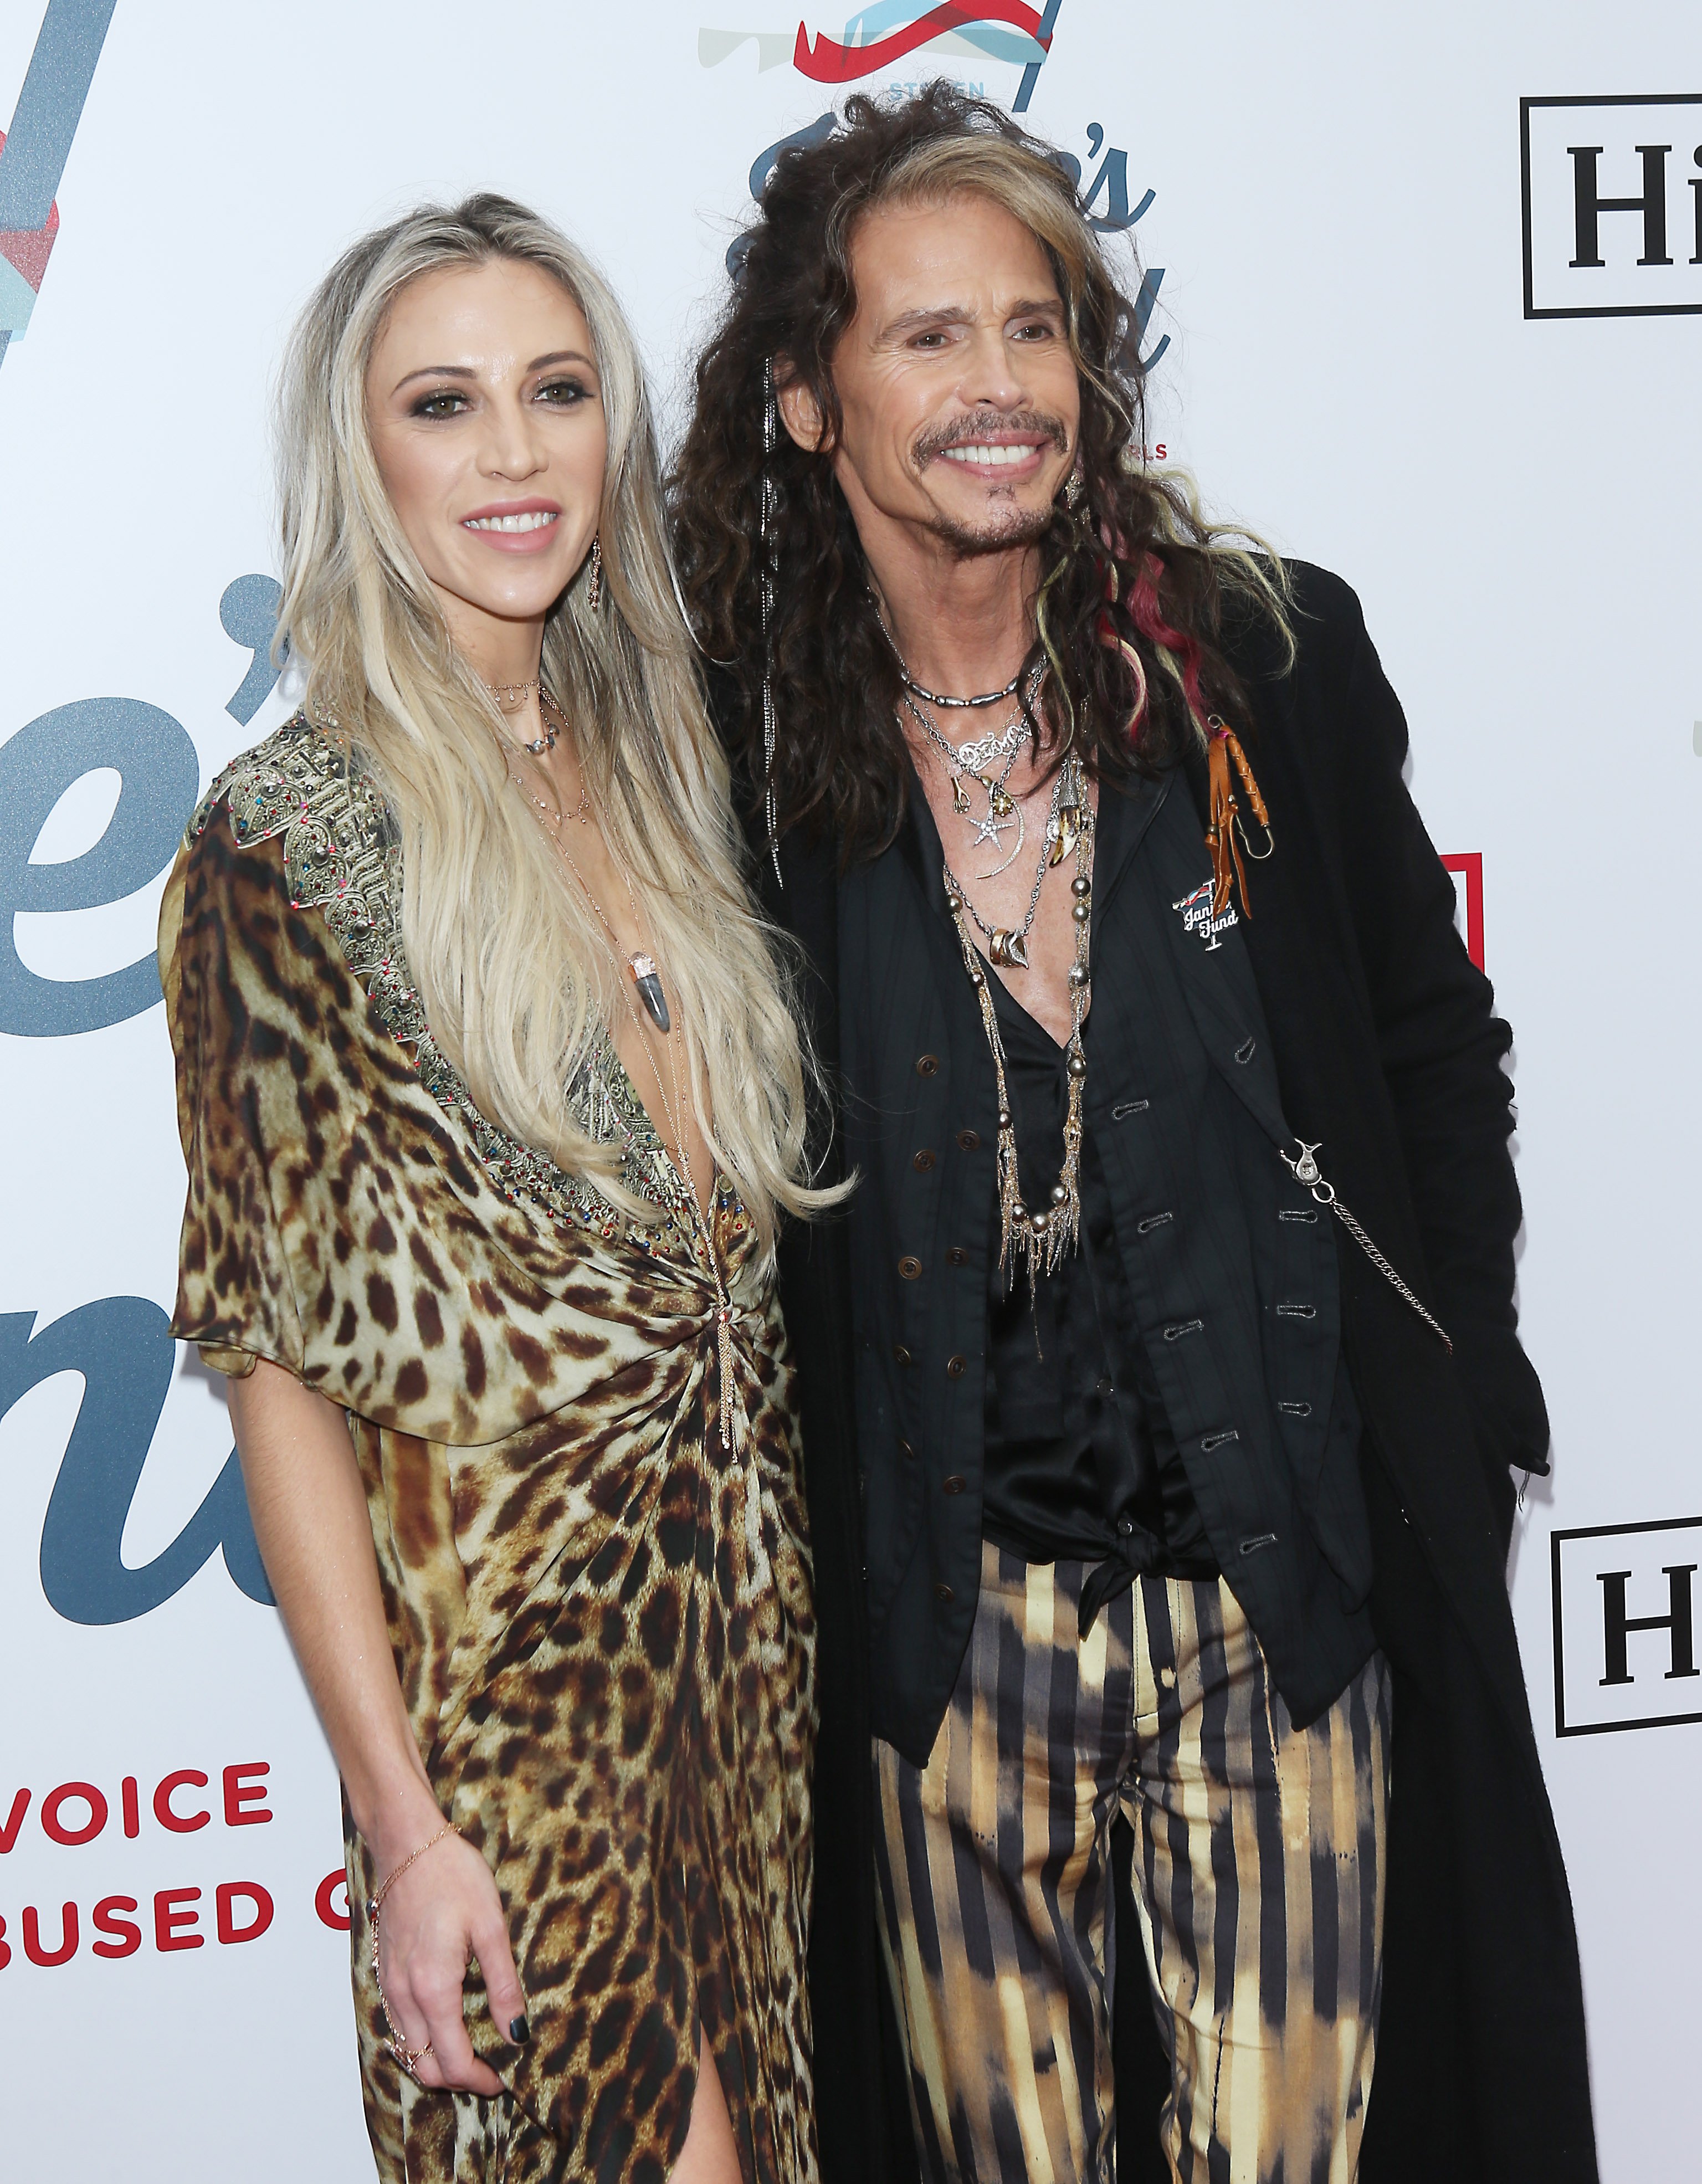 Steven Tyler and Aimee Preston attend Steven Tyler's GRAMMY Awards viewing party benefiting Janie's Fund held at Raleigh Studios on February 10, 2019, in Los Angeles, California. | Source: Getty Images.